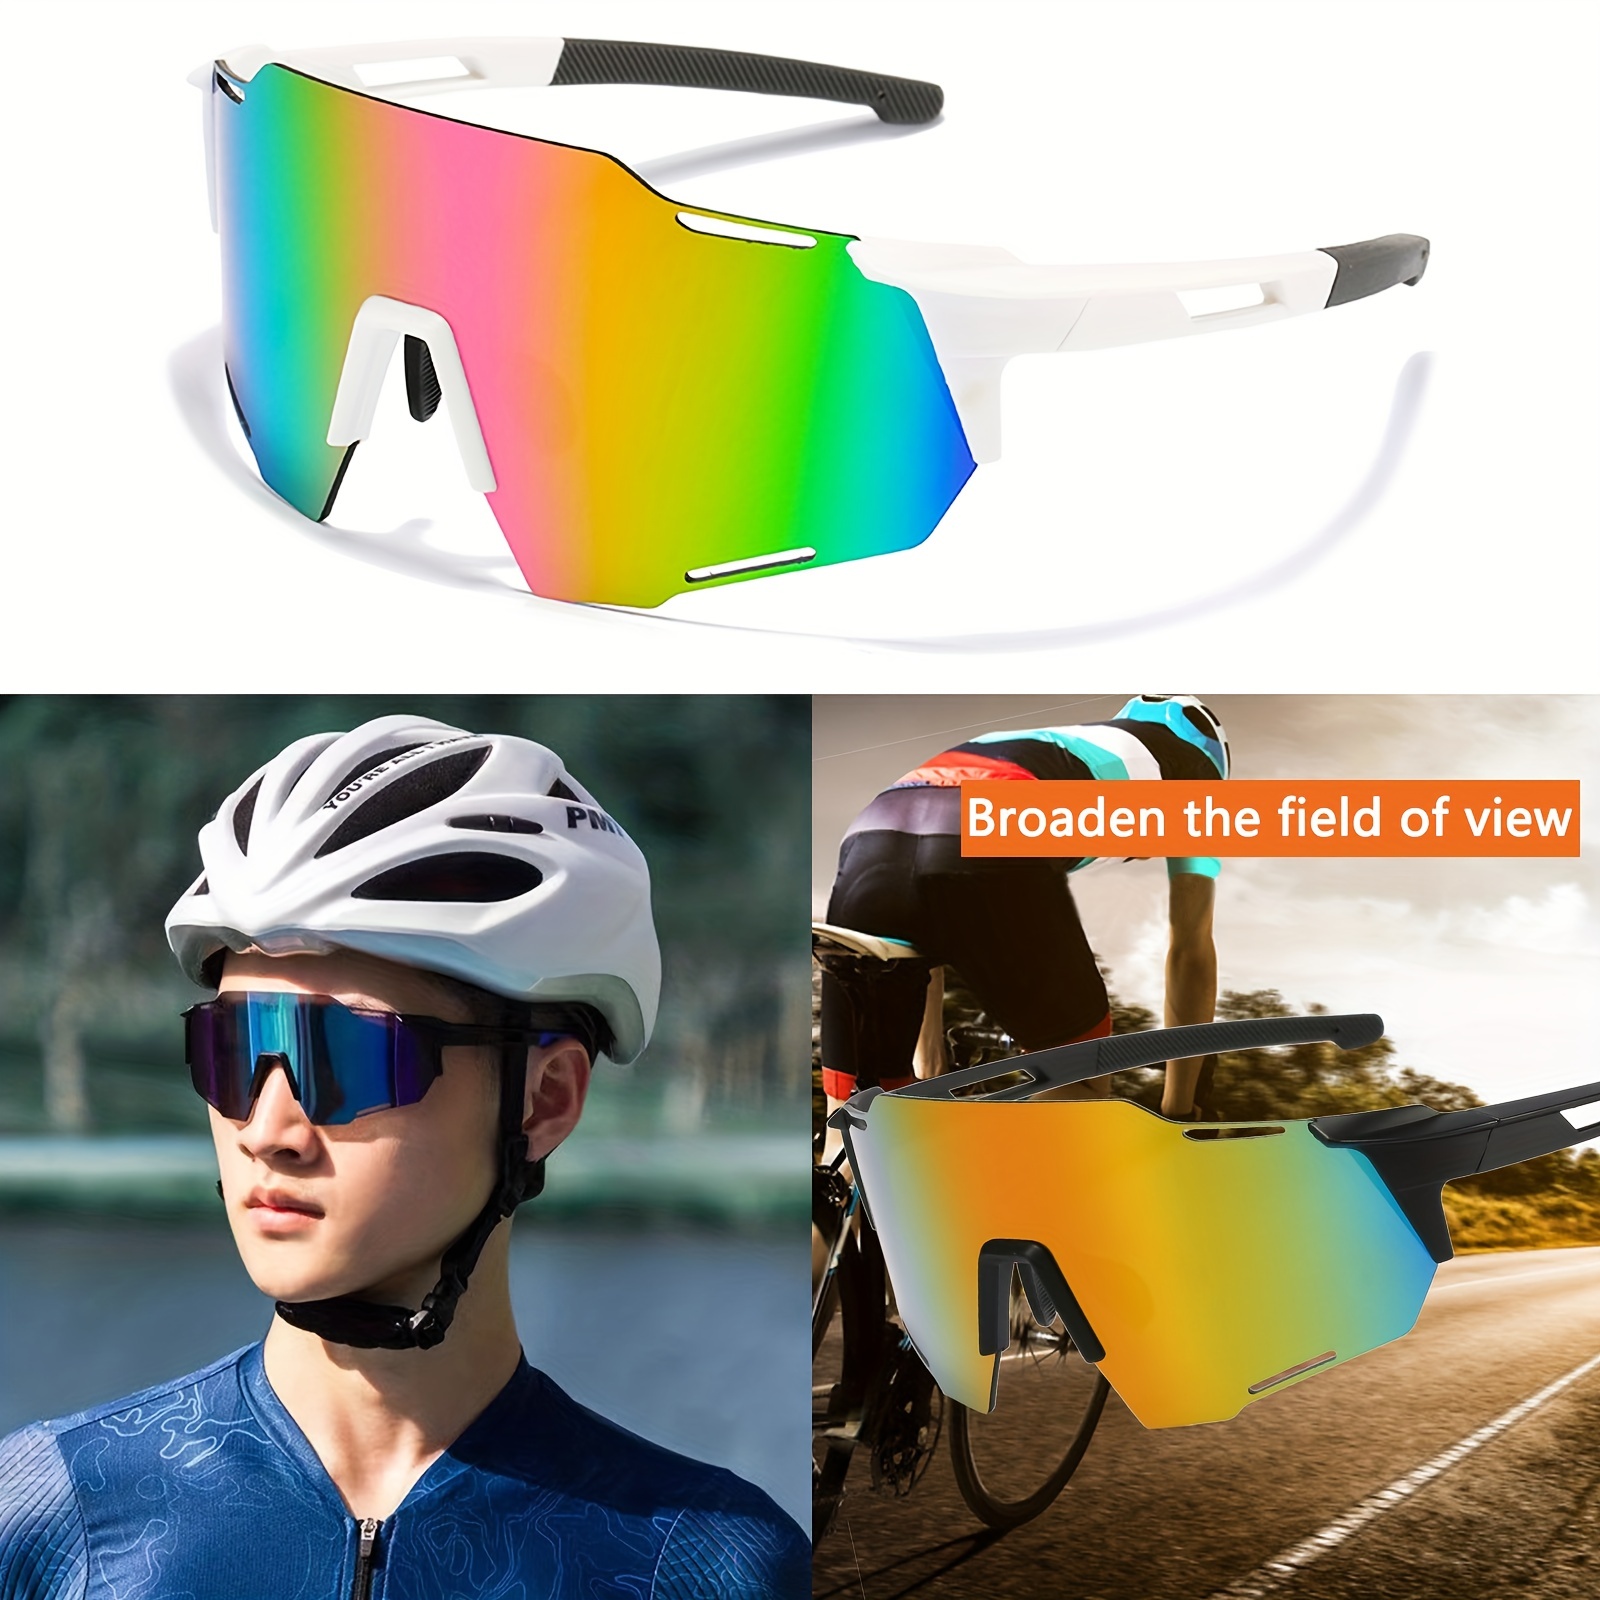 Designer Spied KEN Sunglasses for Men, Sport Goggles with UV400 Protection,  Perfect for Cycling, Multiple Colors Available - 2183